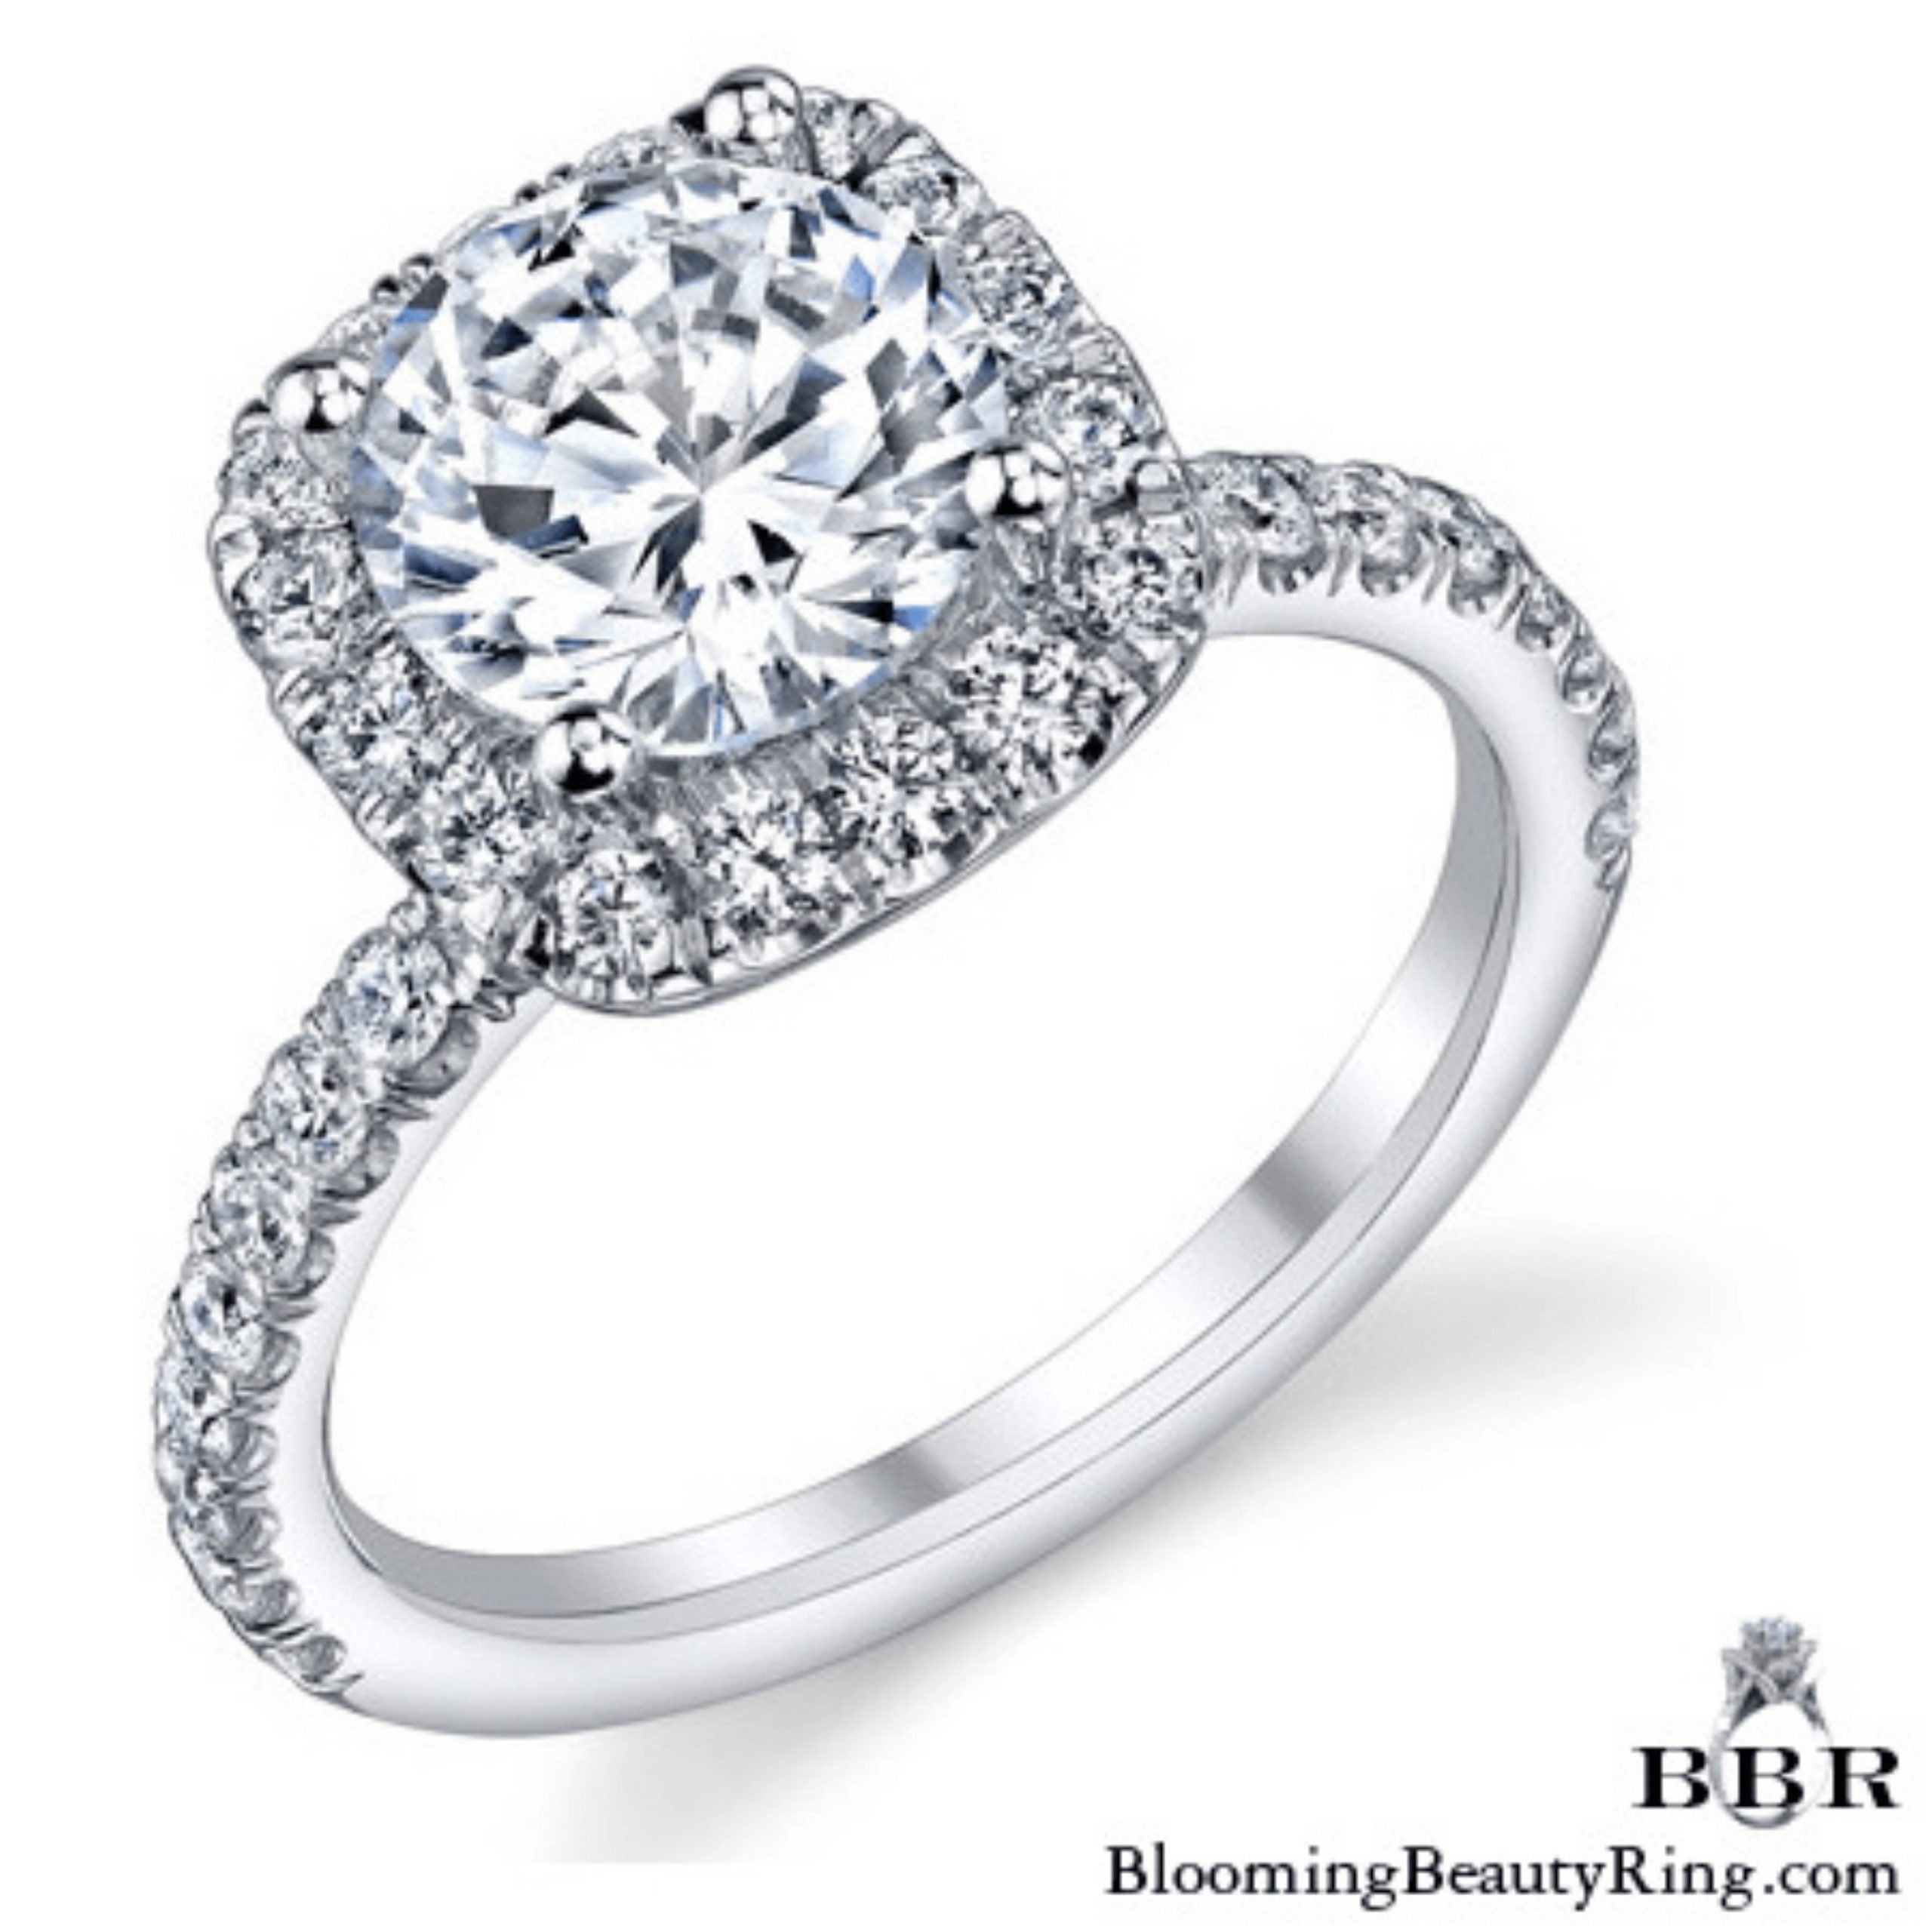 Petite Square Halo Round Shared Prong Set Diamond Engagement Ring - bbr572e standing up